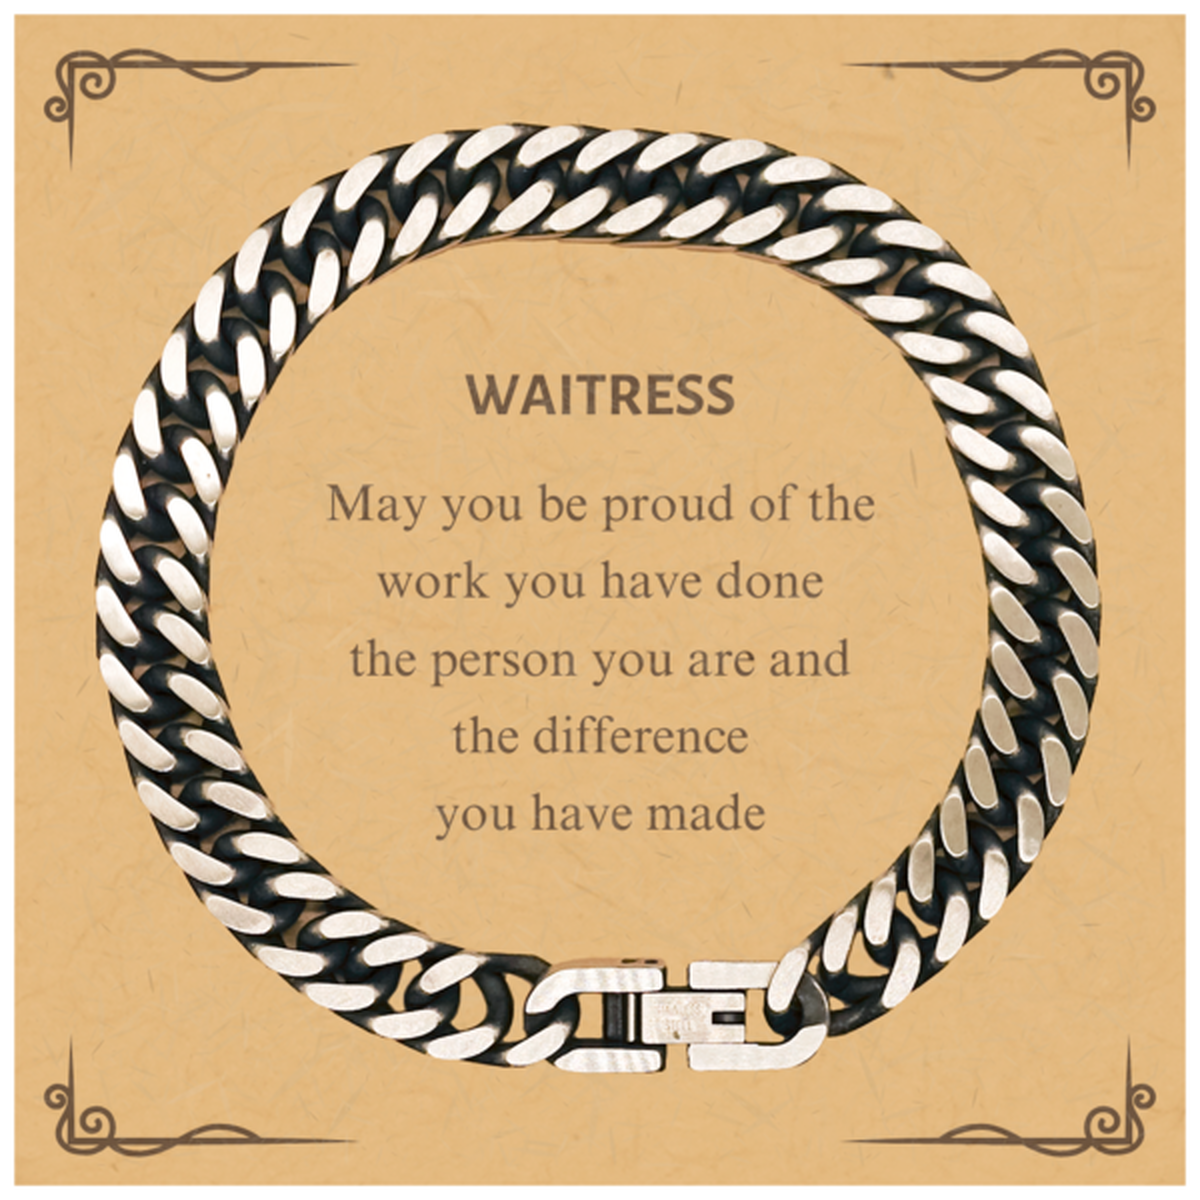 Waitress May you be proud of the work you have done, Retirement Waitress Cuban Link Chain Bracelet for Colleague Appreciation Gifts Amazing for Waitress